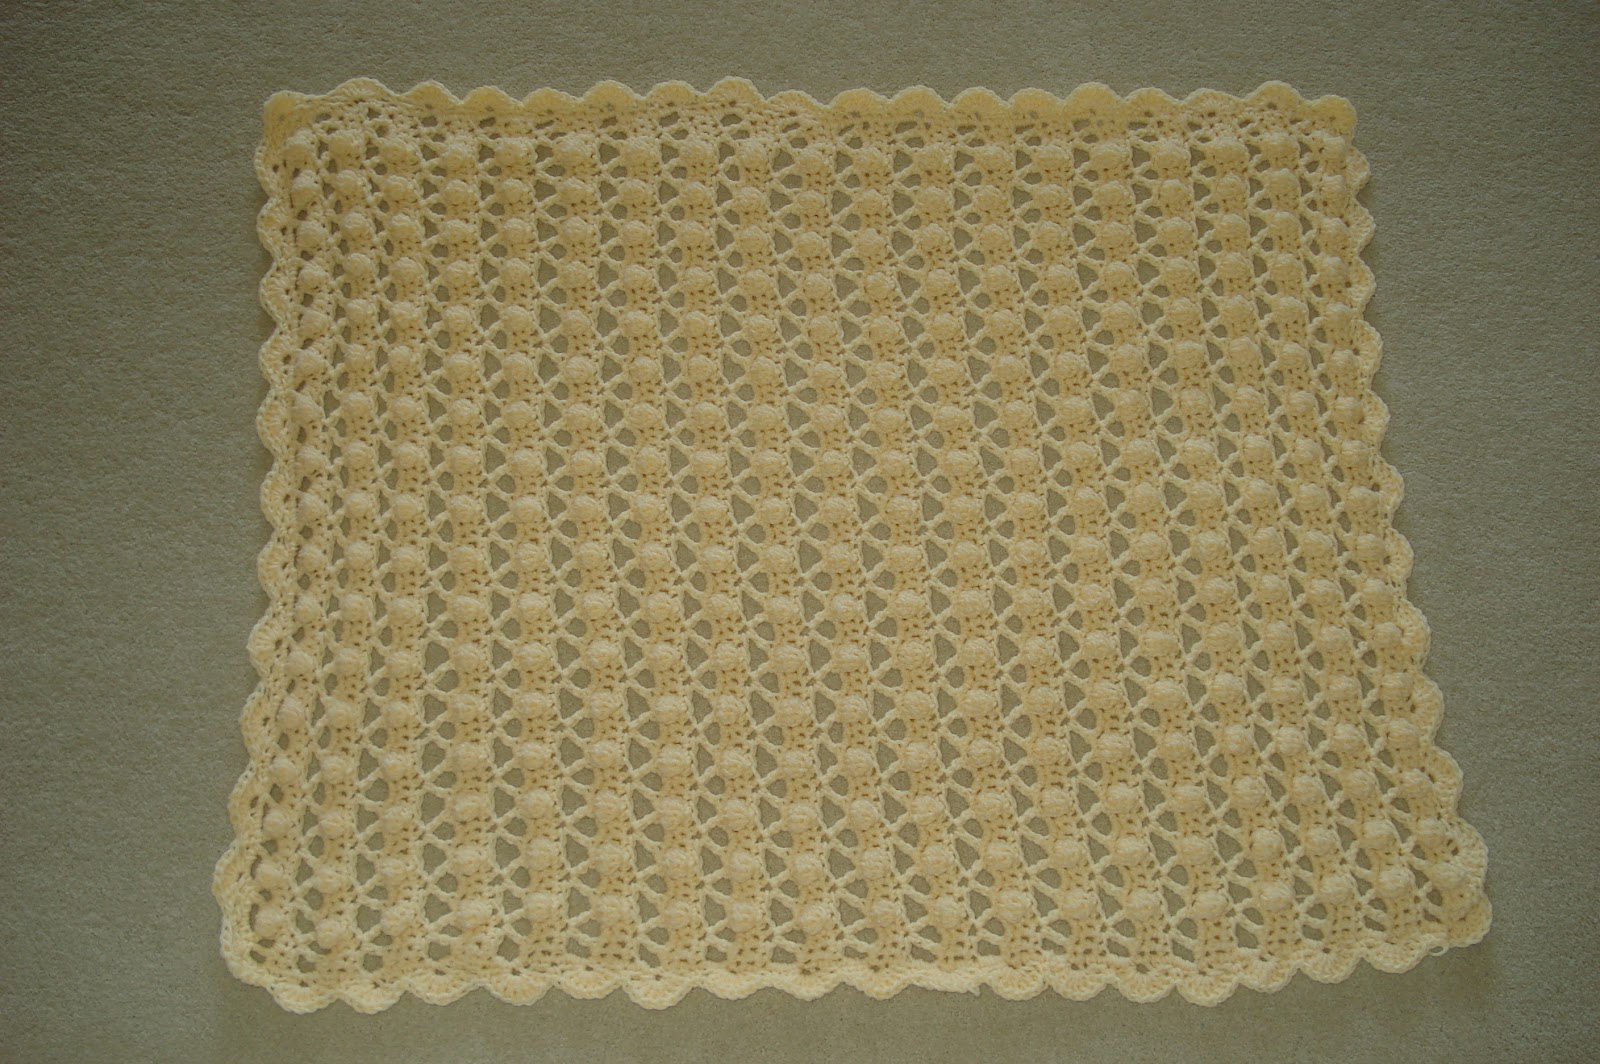 Elle Is For Living!: Crocheted Popcorn Stitch Baby Blanket